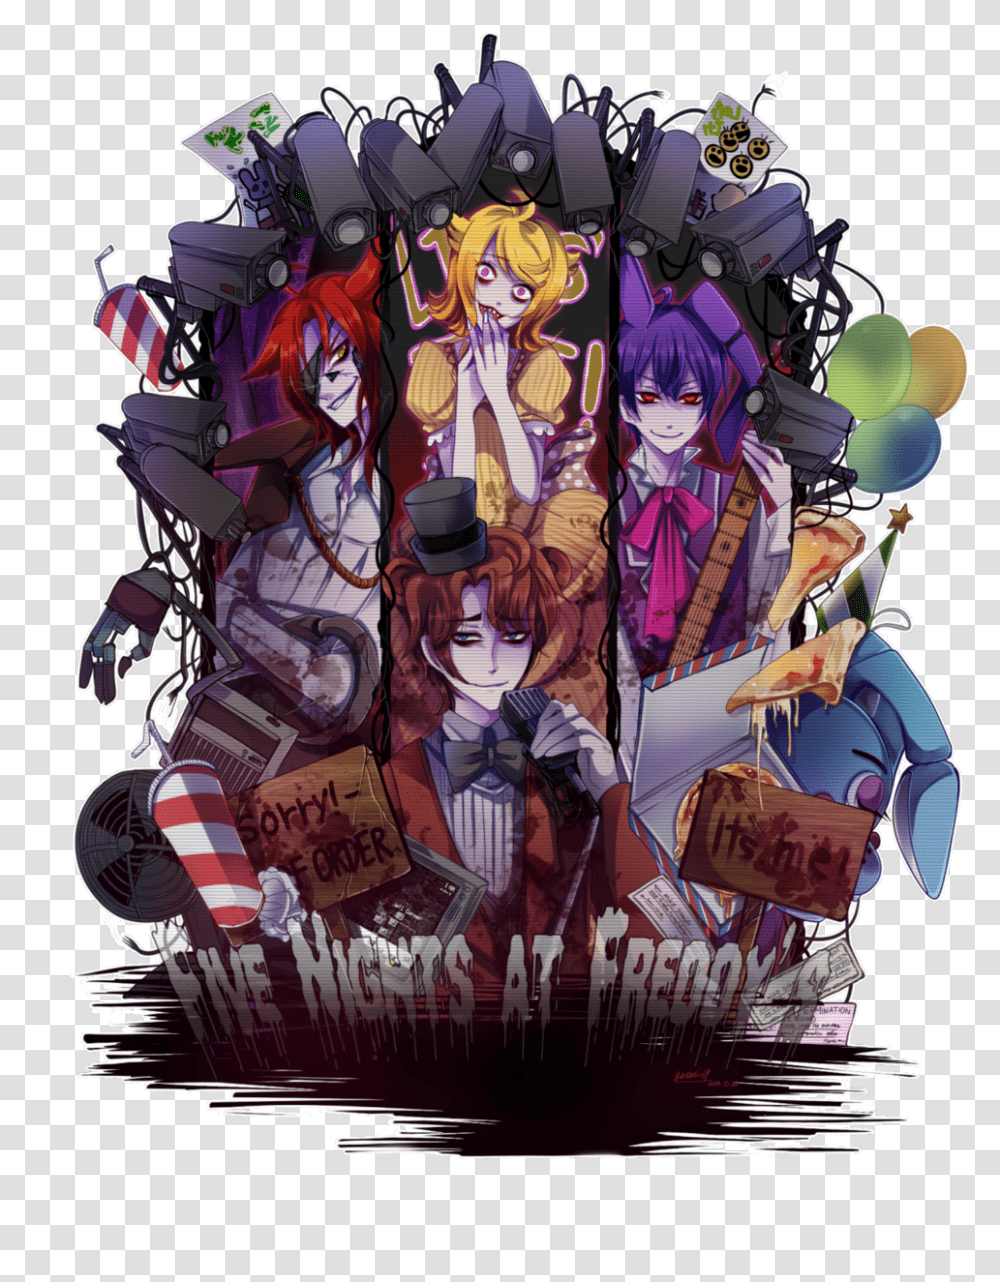 Five Nights At Freddy S Anime And Bonnie Image Anime Five Nights At Freddy's Fan Art, Comics, Book, Poster, Advertisement Transparent Png